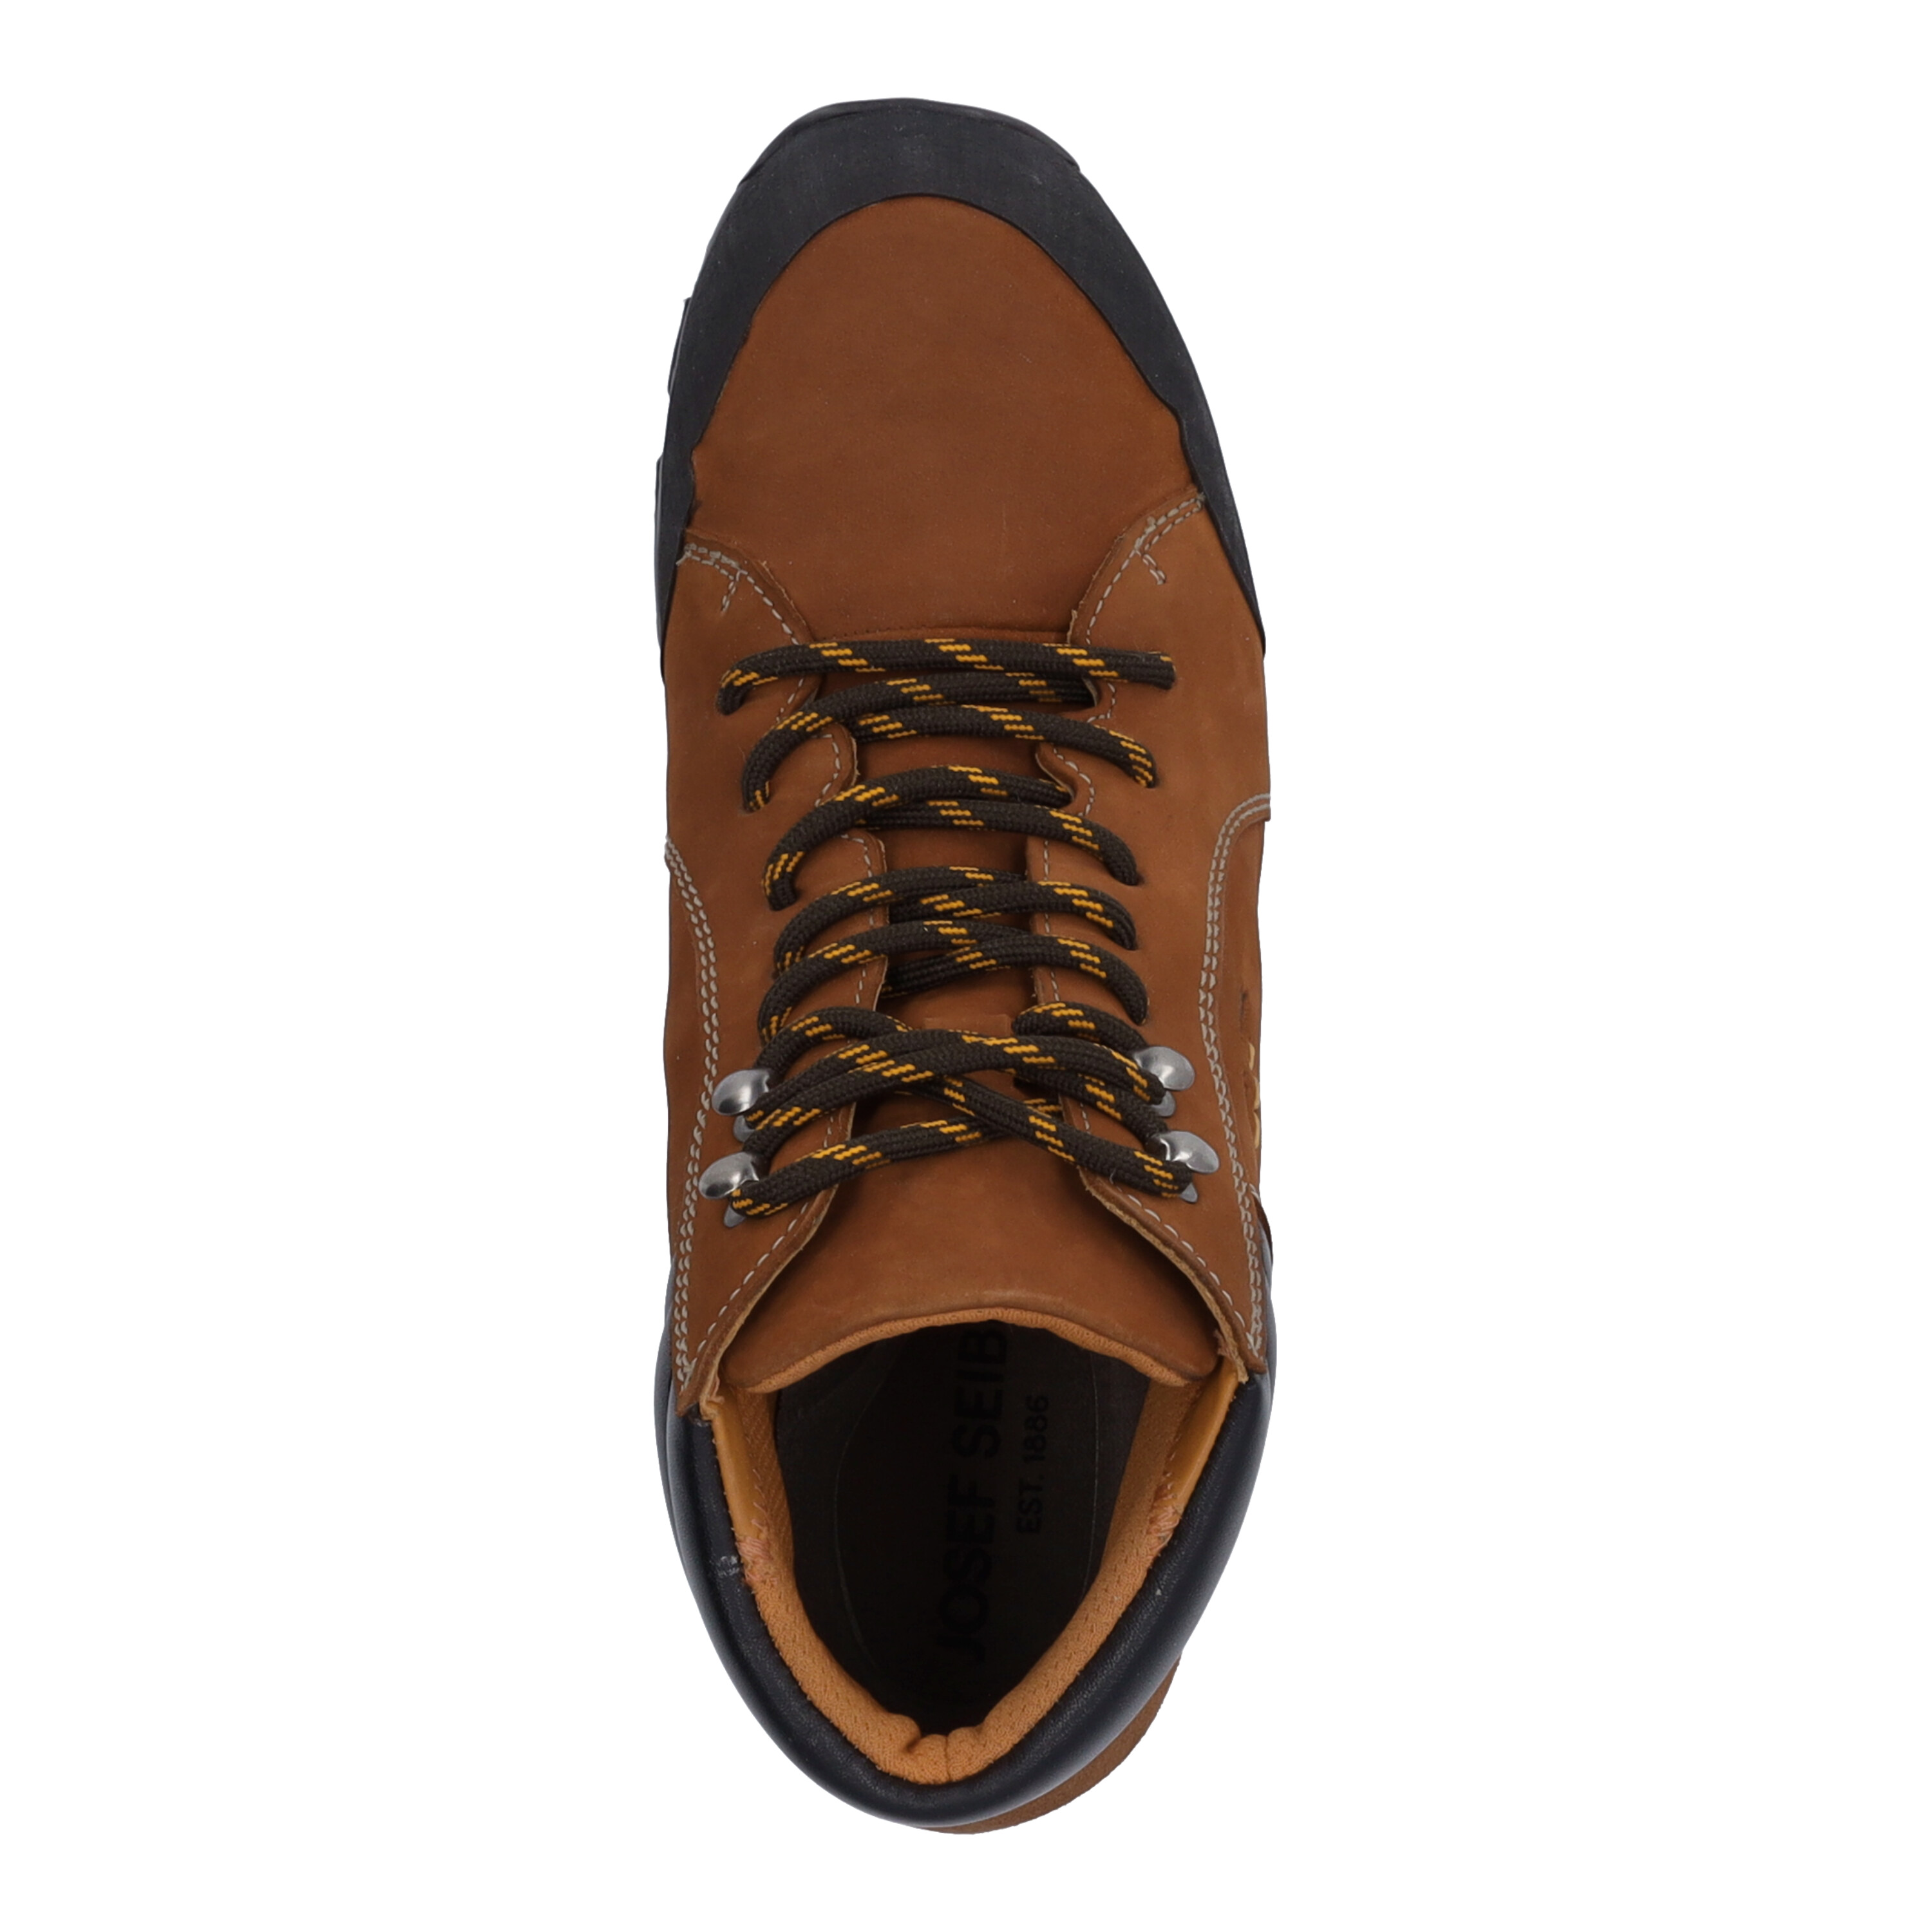 Noih 53 - Rost suede leather